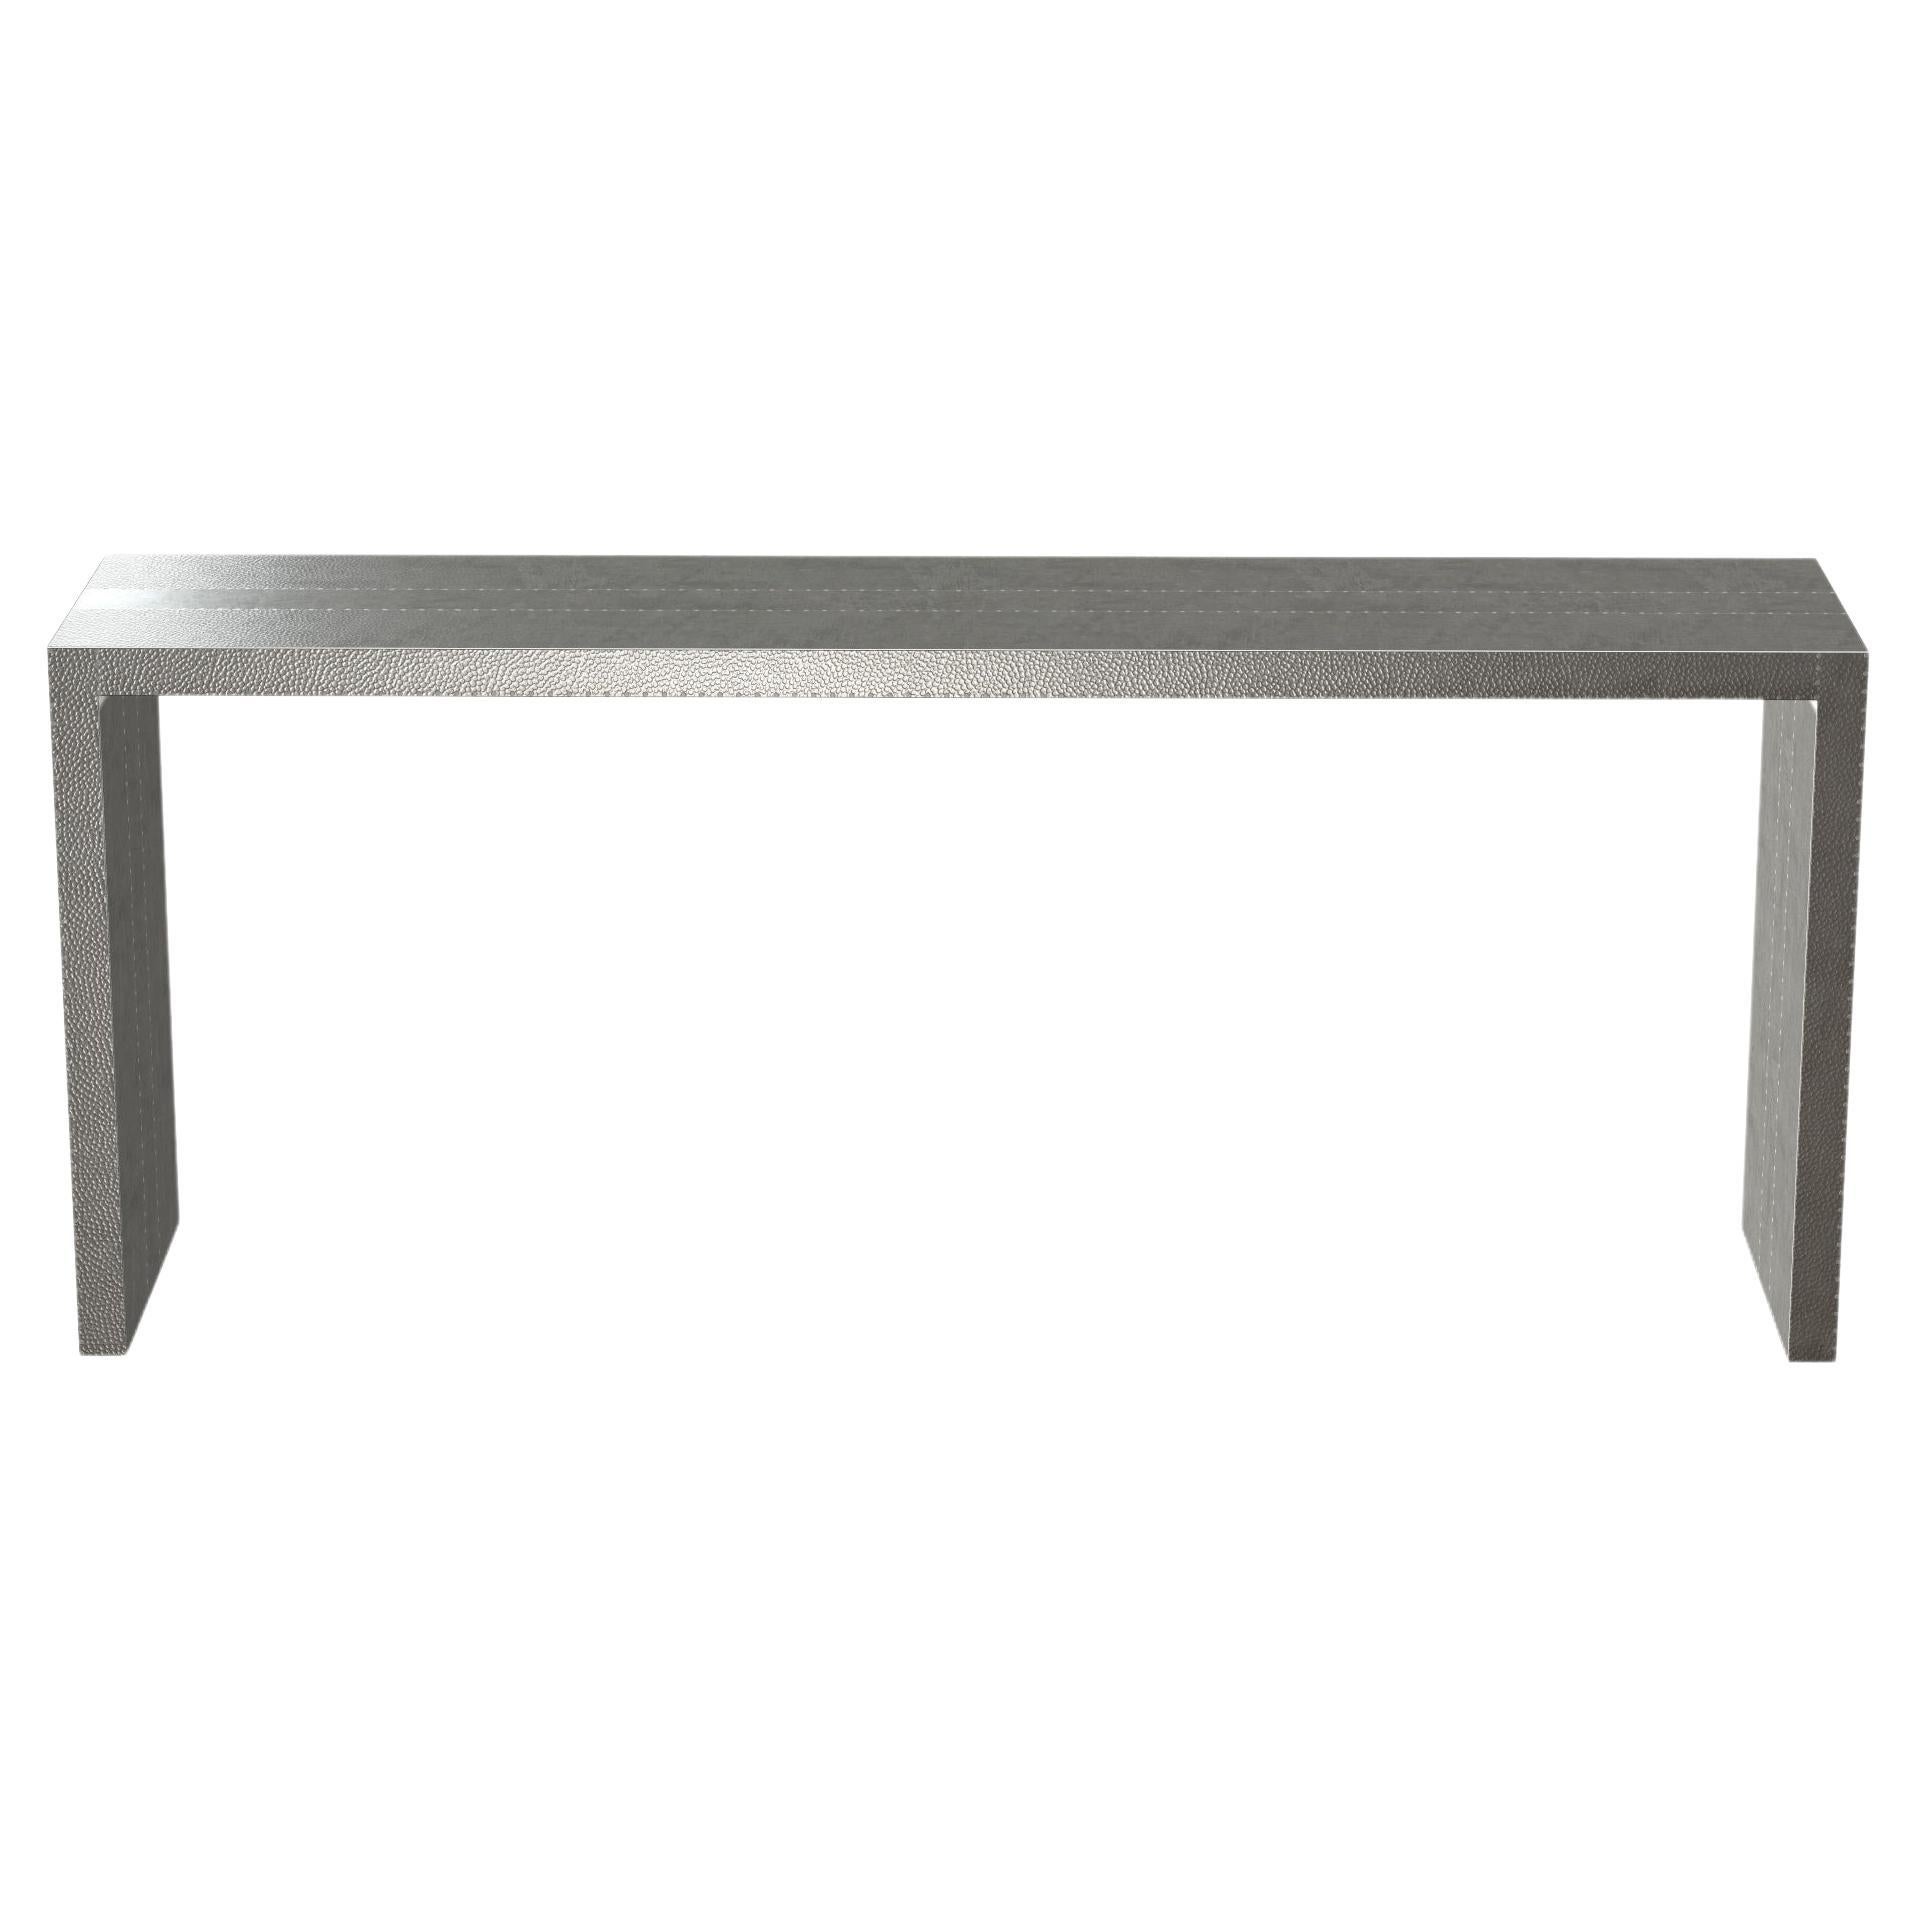 Art Deco Conference Console Tables in White Bronze Mid. Hammered by Alison Spear